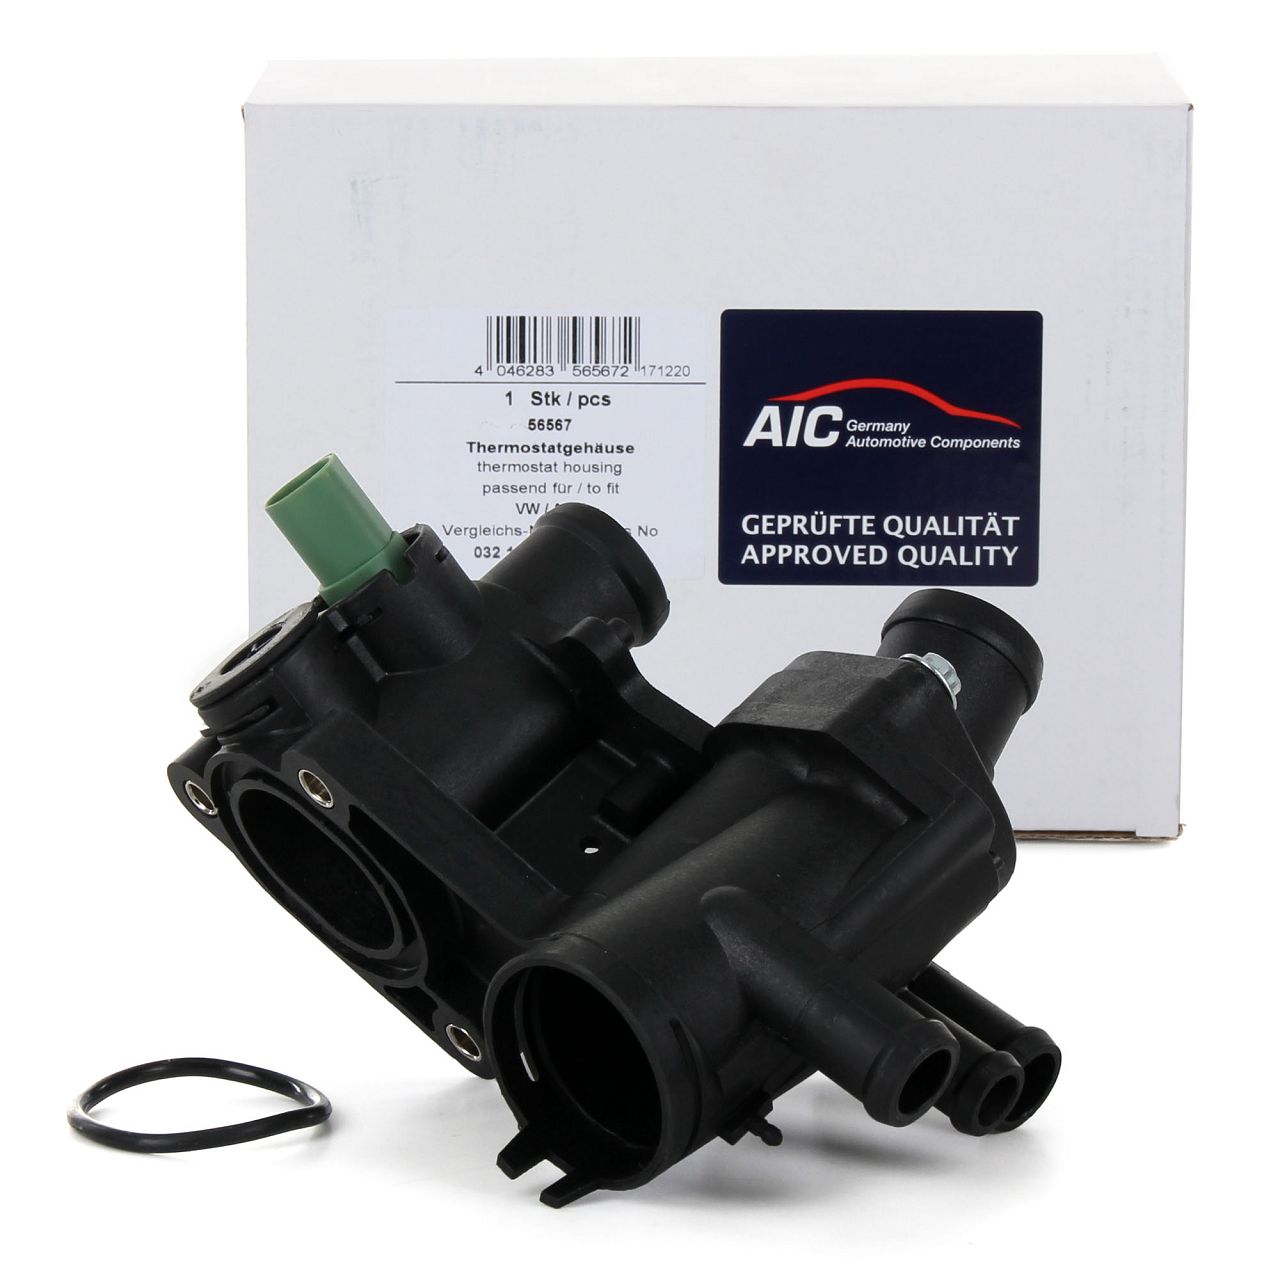 https://www.ws-autoteile.com/img/AIC_COMPETITION_THERMOSTATGEHAEUSE_56567_A18903W002_201905201135_99.jpg